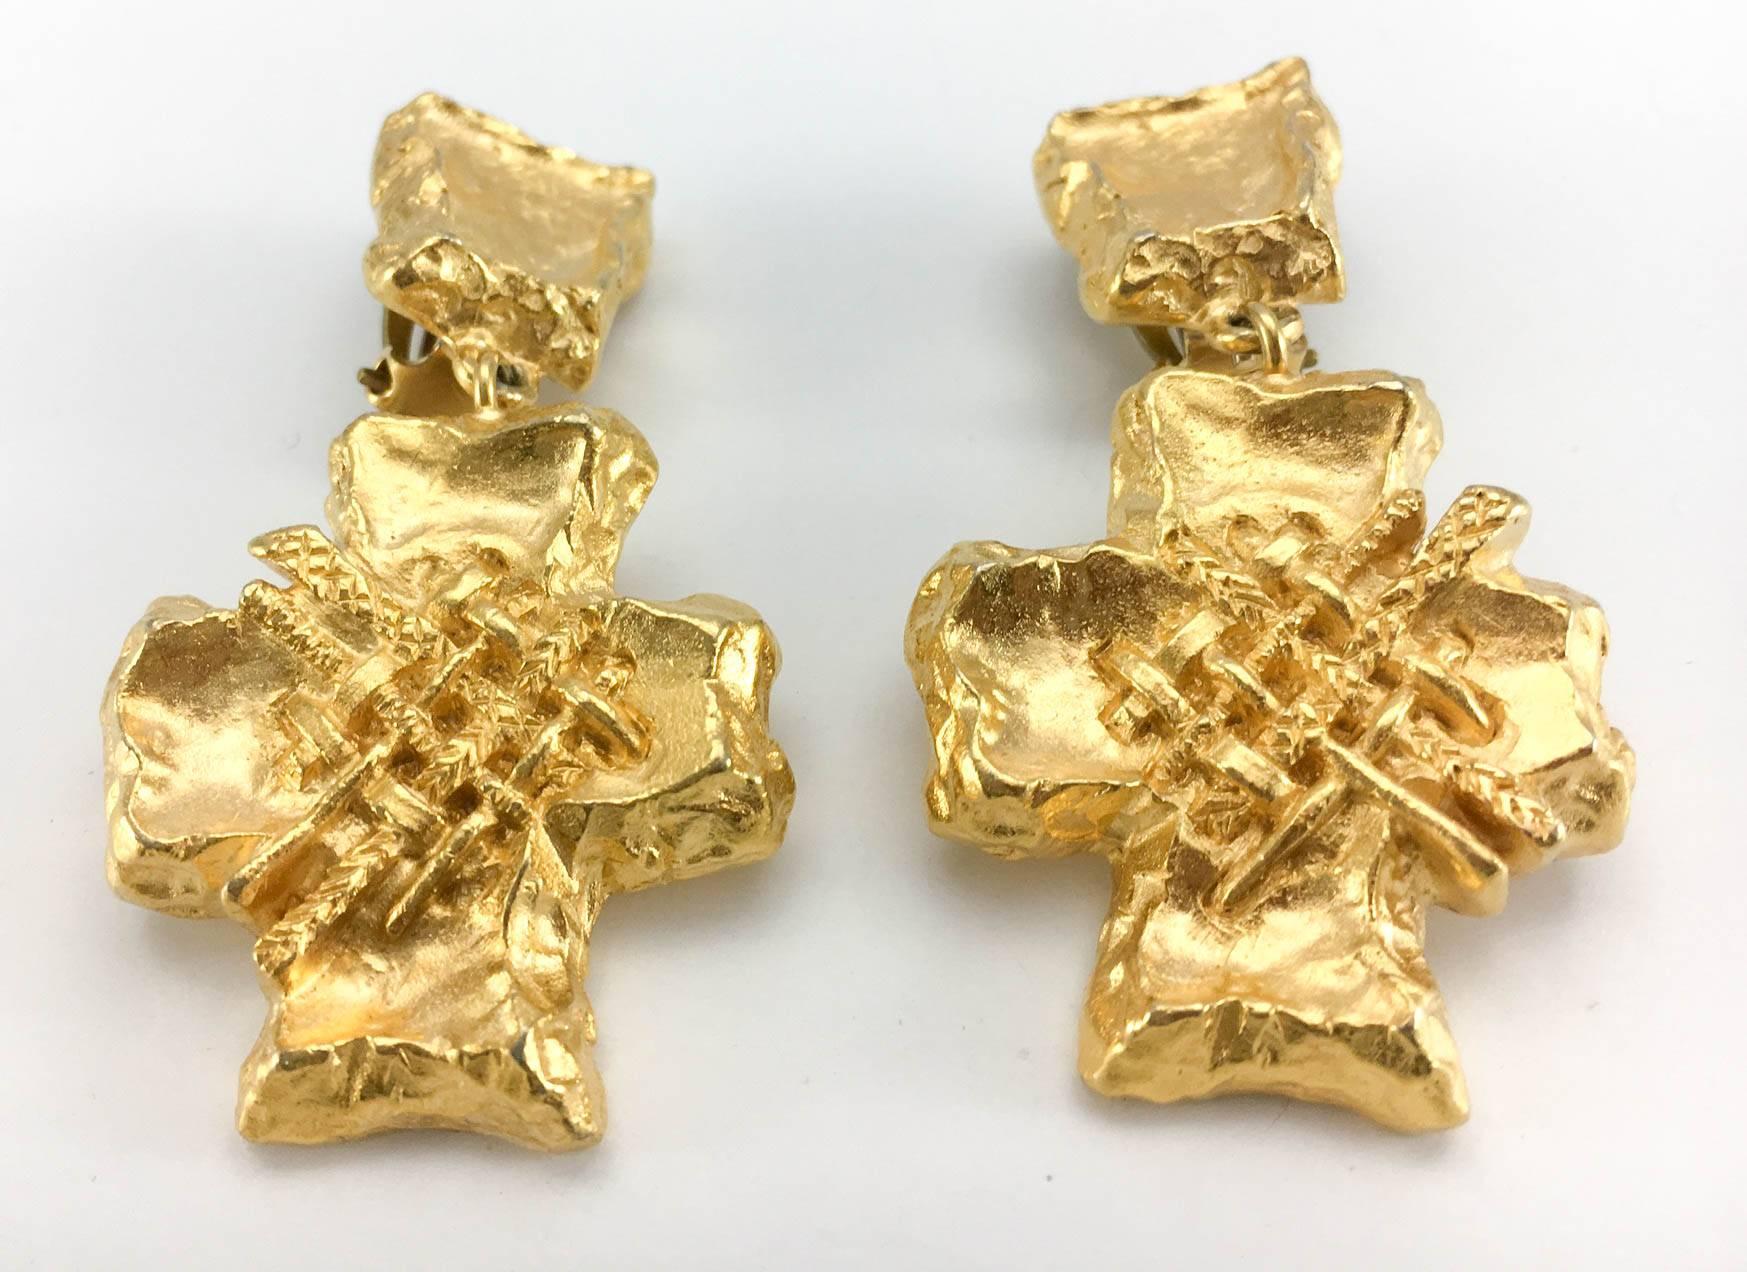 Lacroix Stylized Gold-Plated Cross, by Goossens - 1980s 2